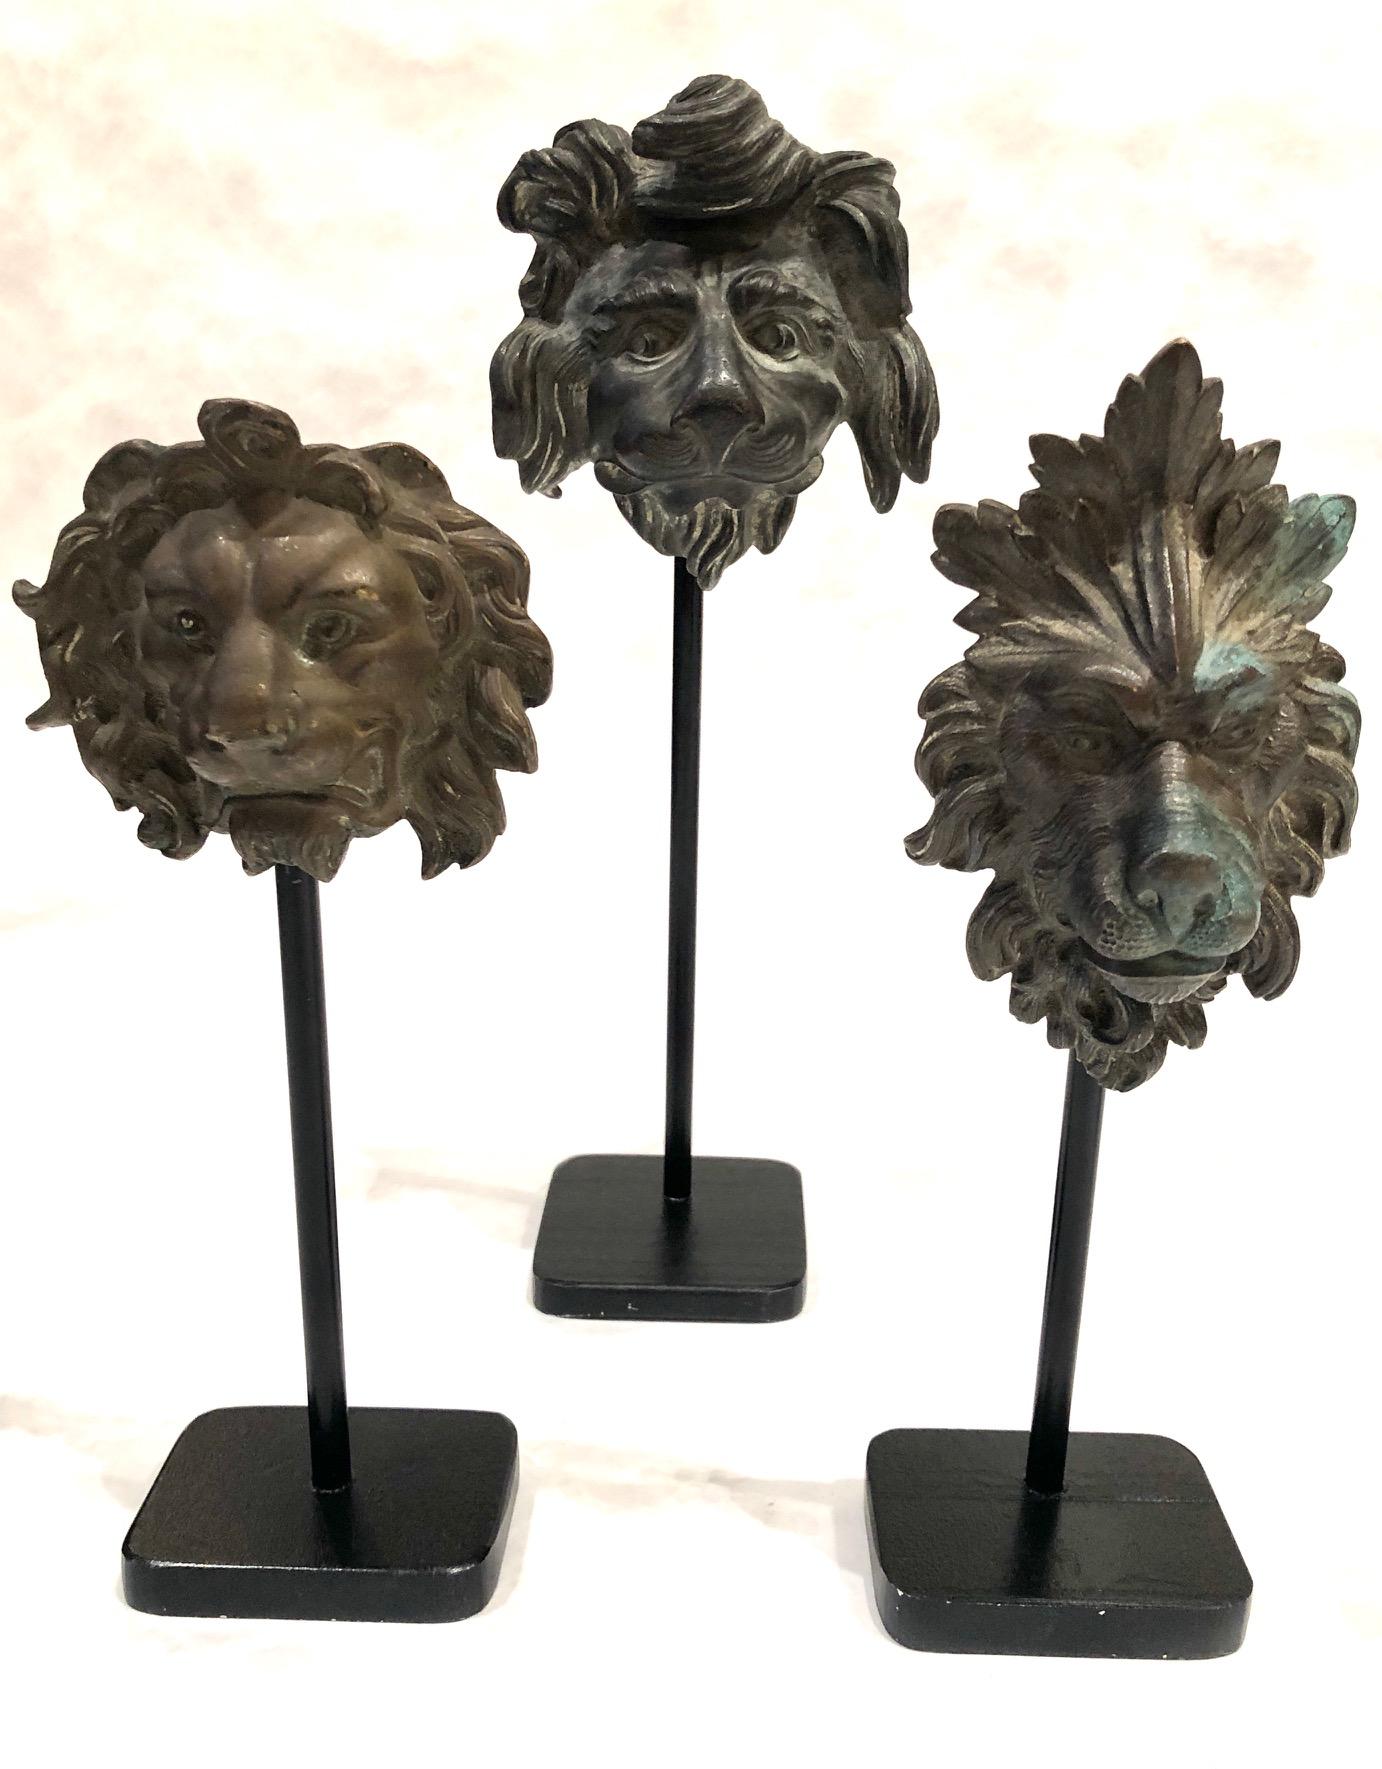 Beautiful and rare set of 6 zinc lion head fragments, French circa 1850-1900
All mounted on a metal stand. Measurement below is the tallest, all in slightly different
heights and widths. Weathered, but in very good condition.